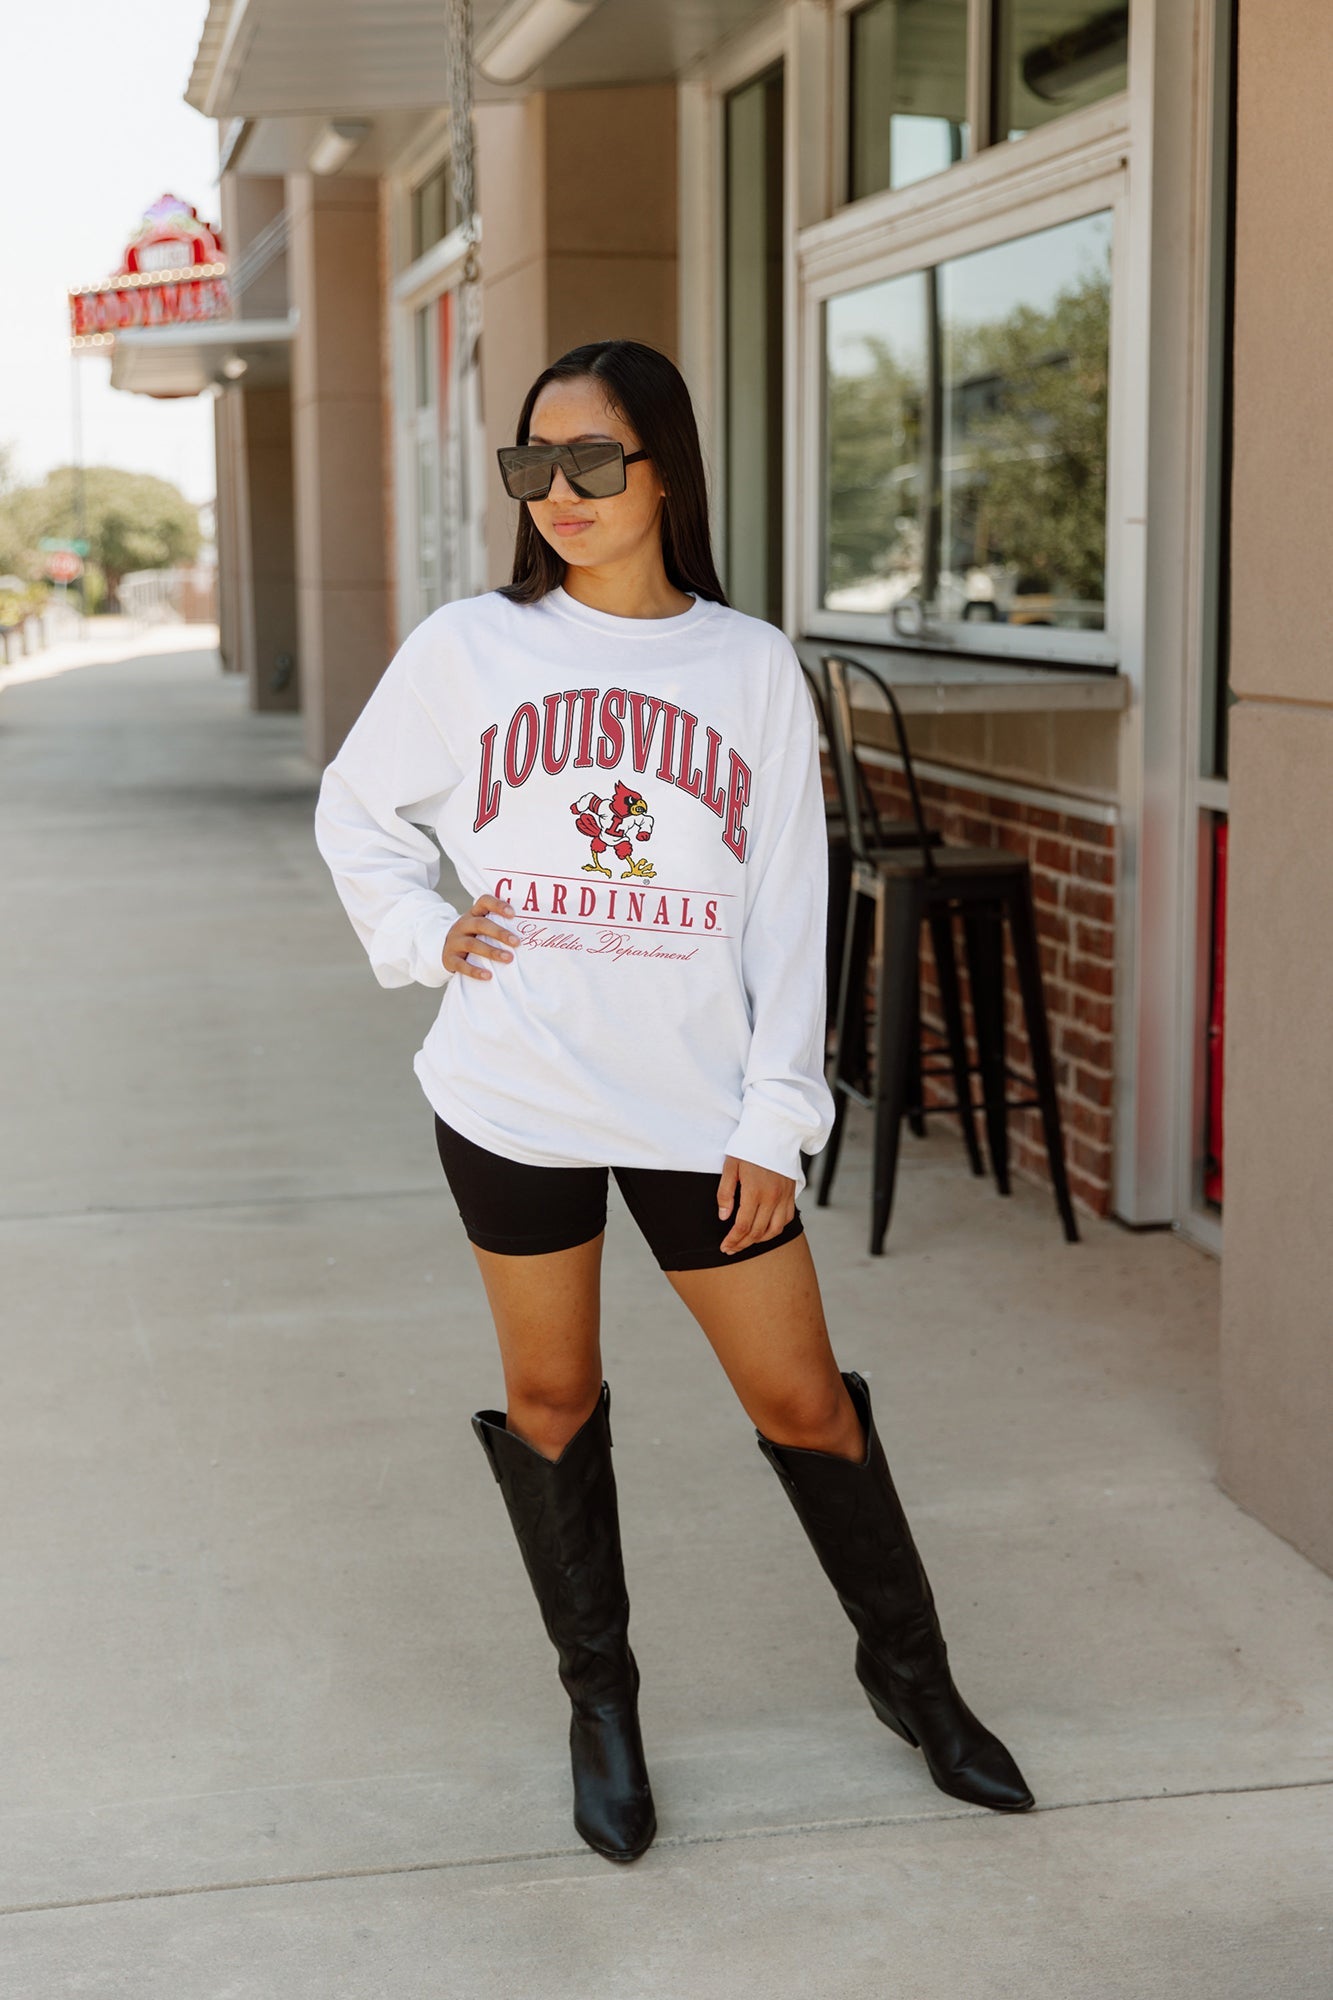 Gameday Couture Louisville Cardinals Team Shop in NCAA Fan Shop